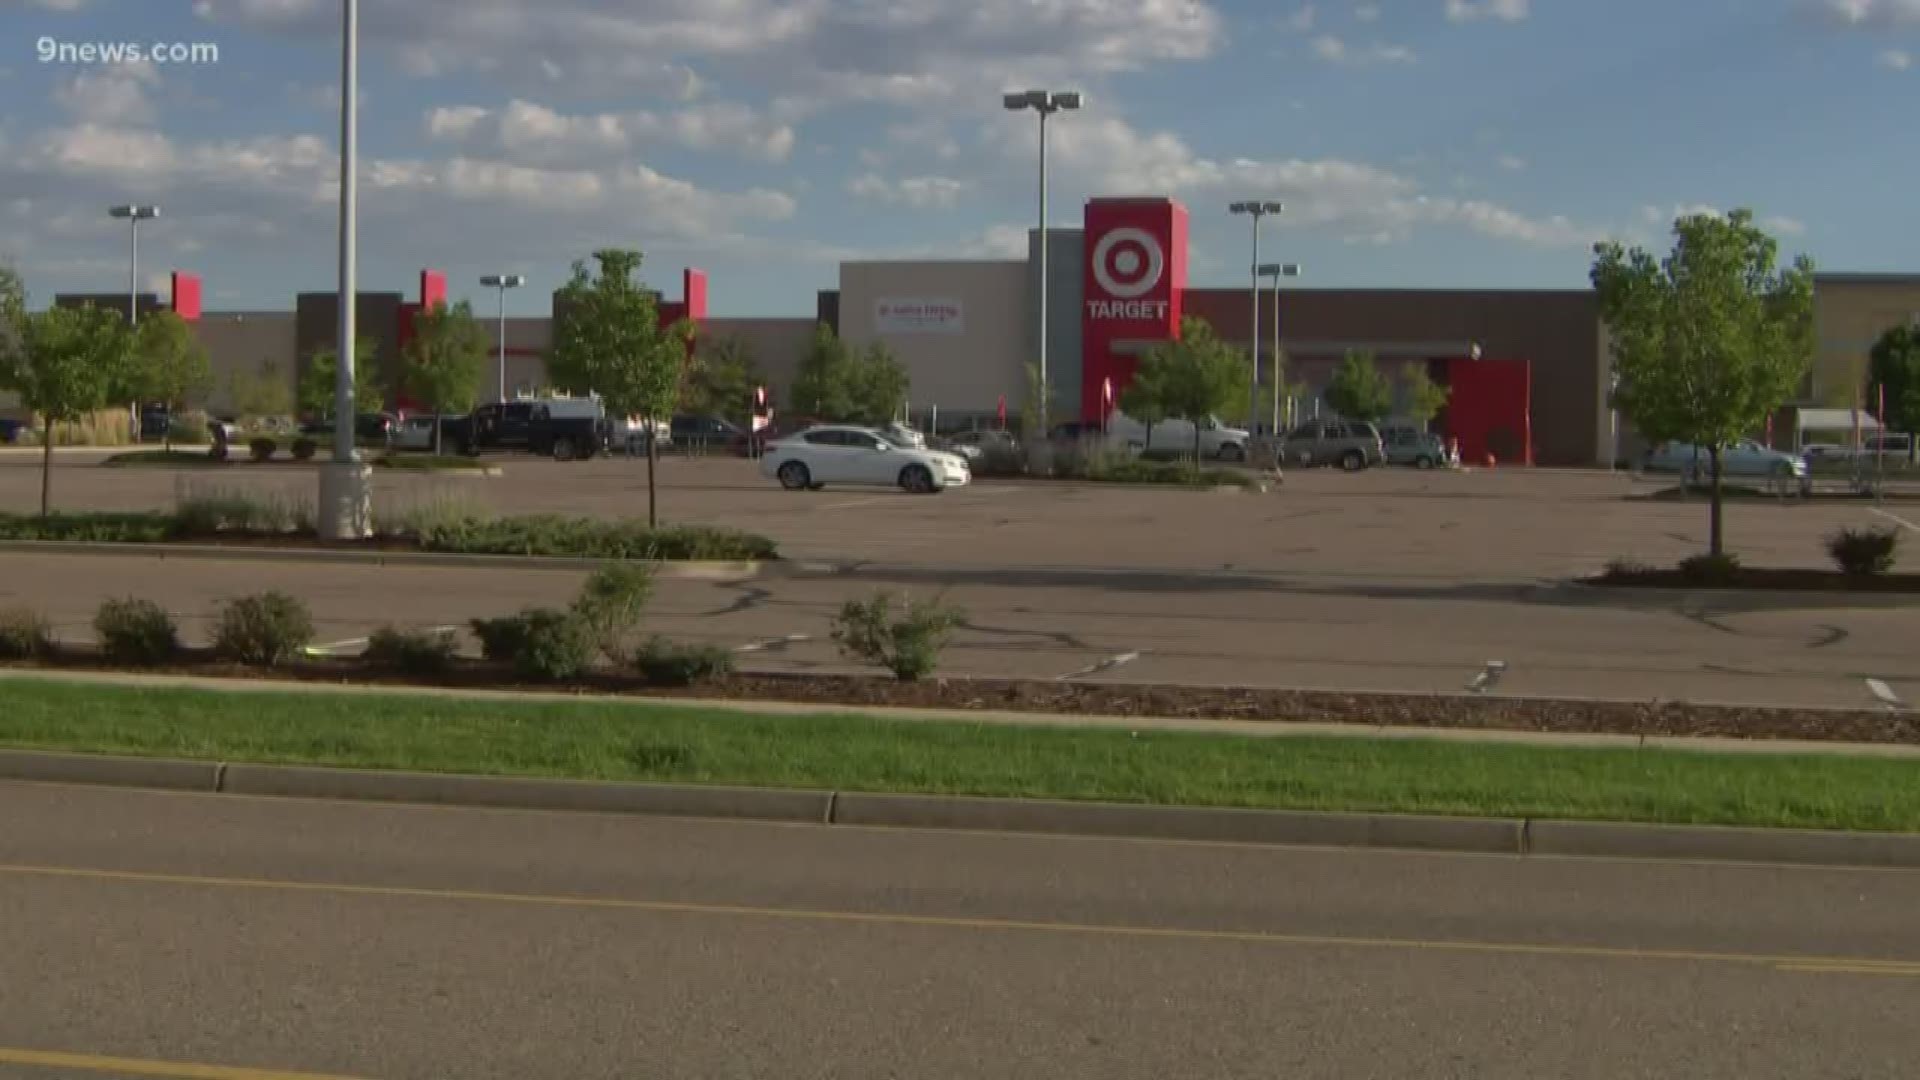 The woman said she was shopping in the store and asked for a manager when her coupons weren't working. She admits things escalated to shouting, and then police were called. She was asked to take her hands out of her pockets, was patted down and on camera, police said they didn't know why they were called. Aurora Police had no comment but said they will be reviewing bodycam footage.